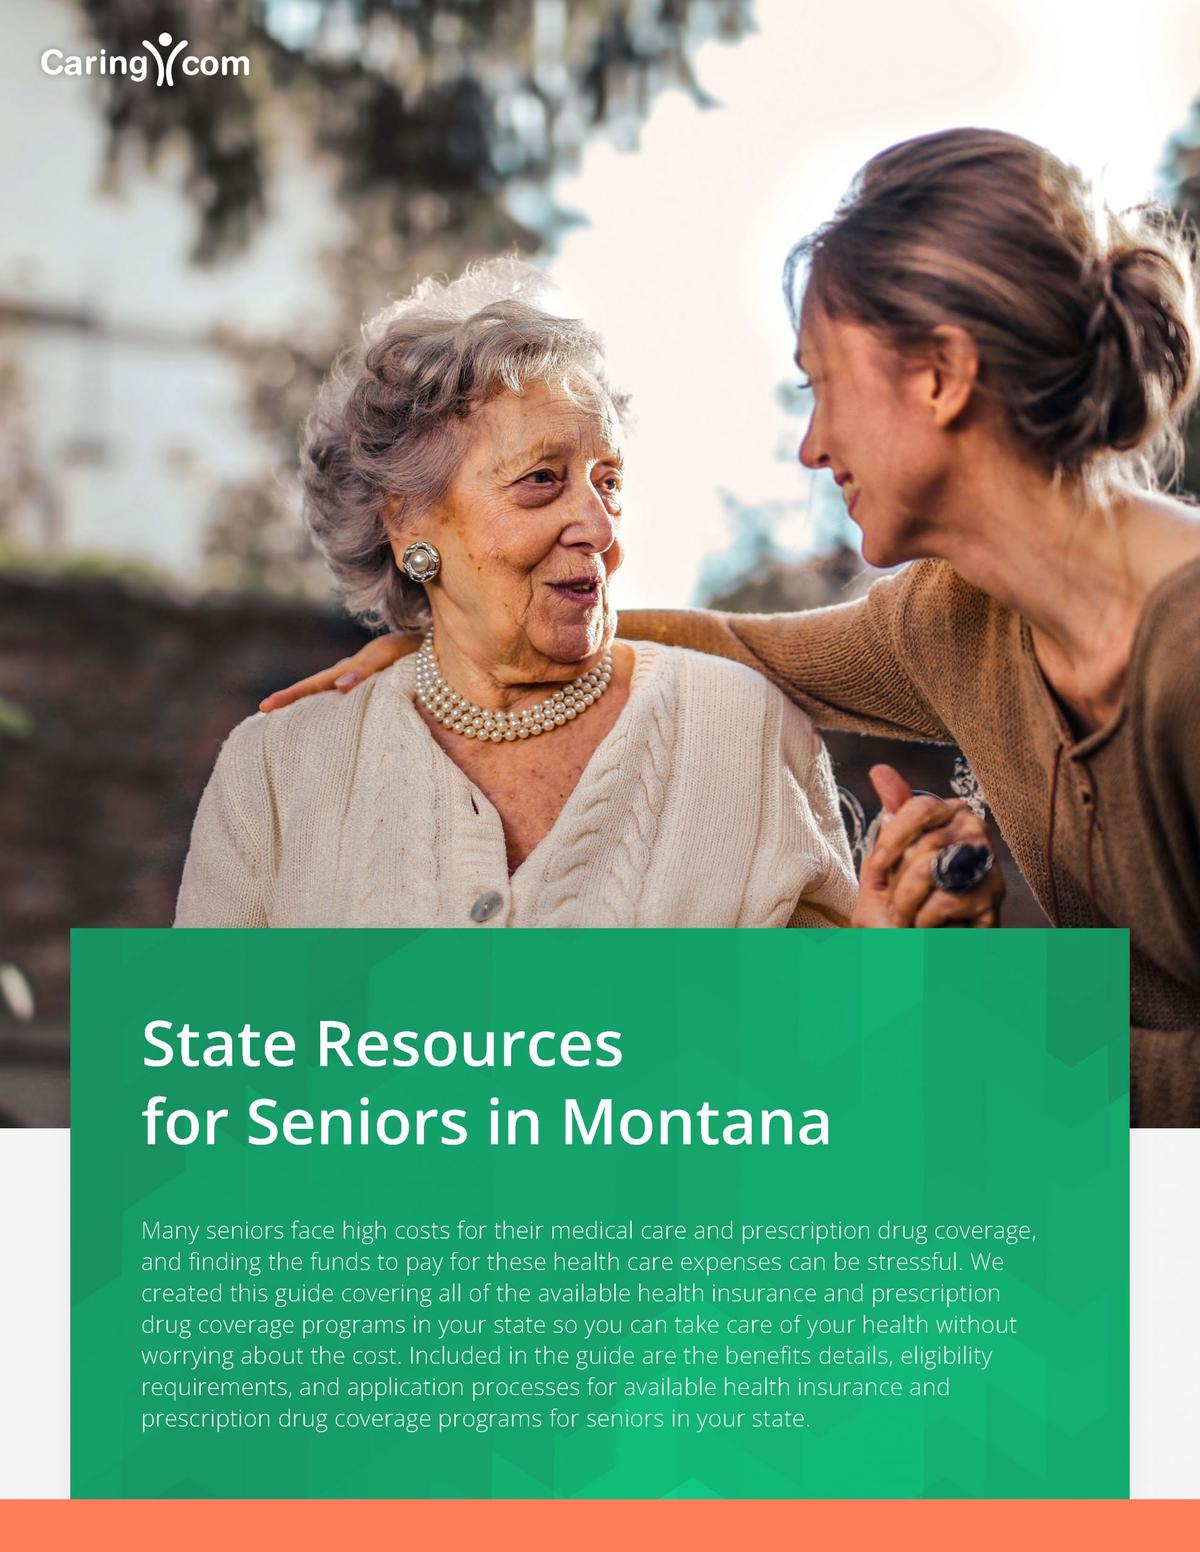 Financial Assistance for Prescriptions in Montana